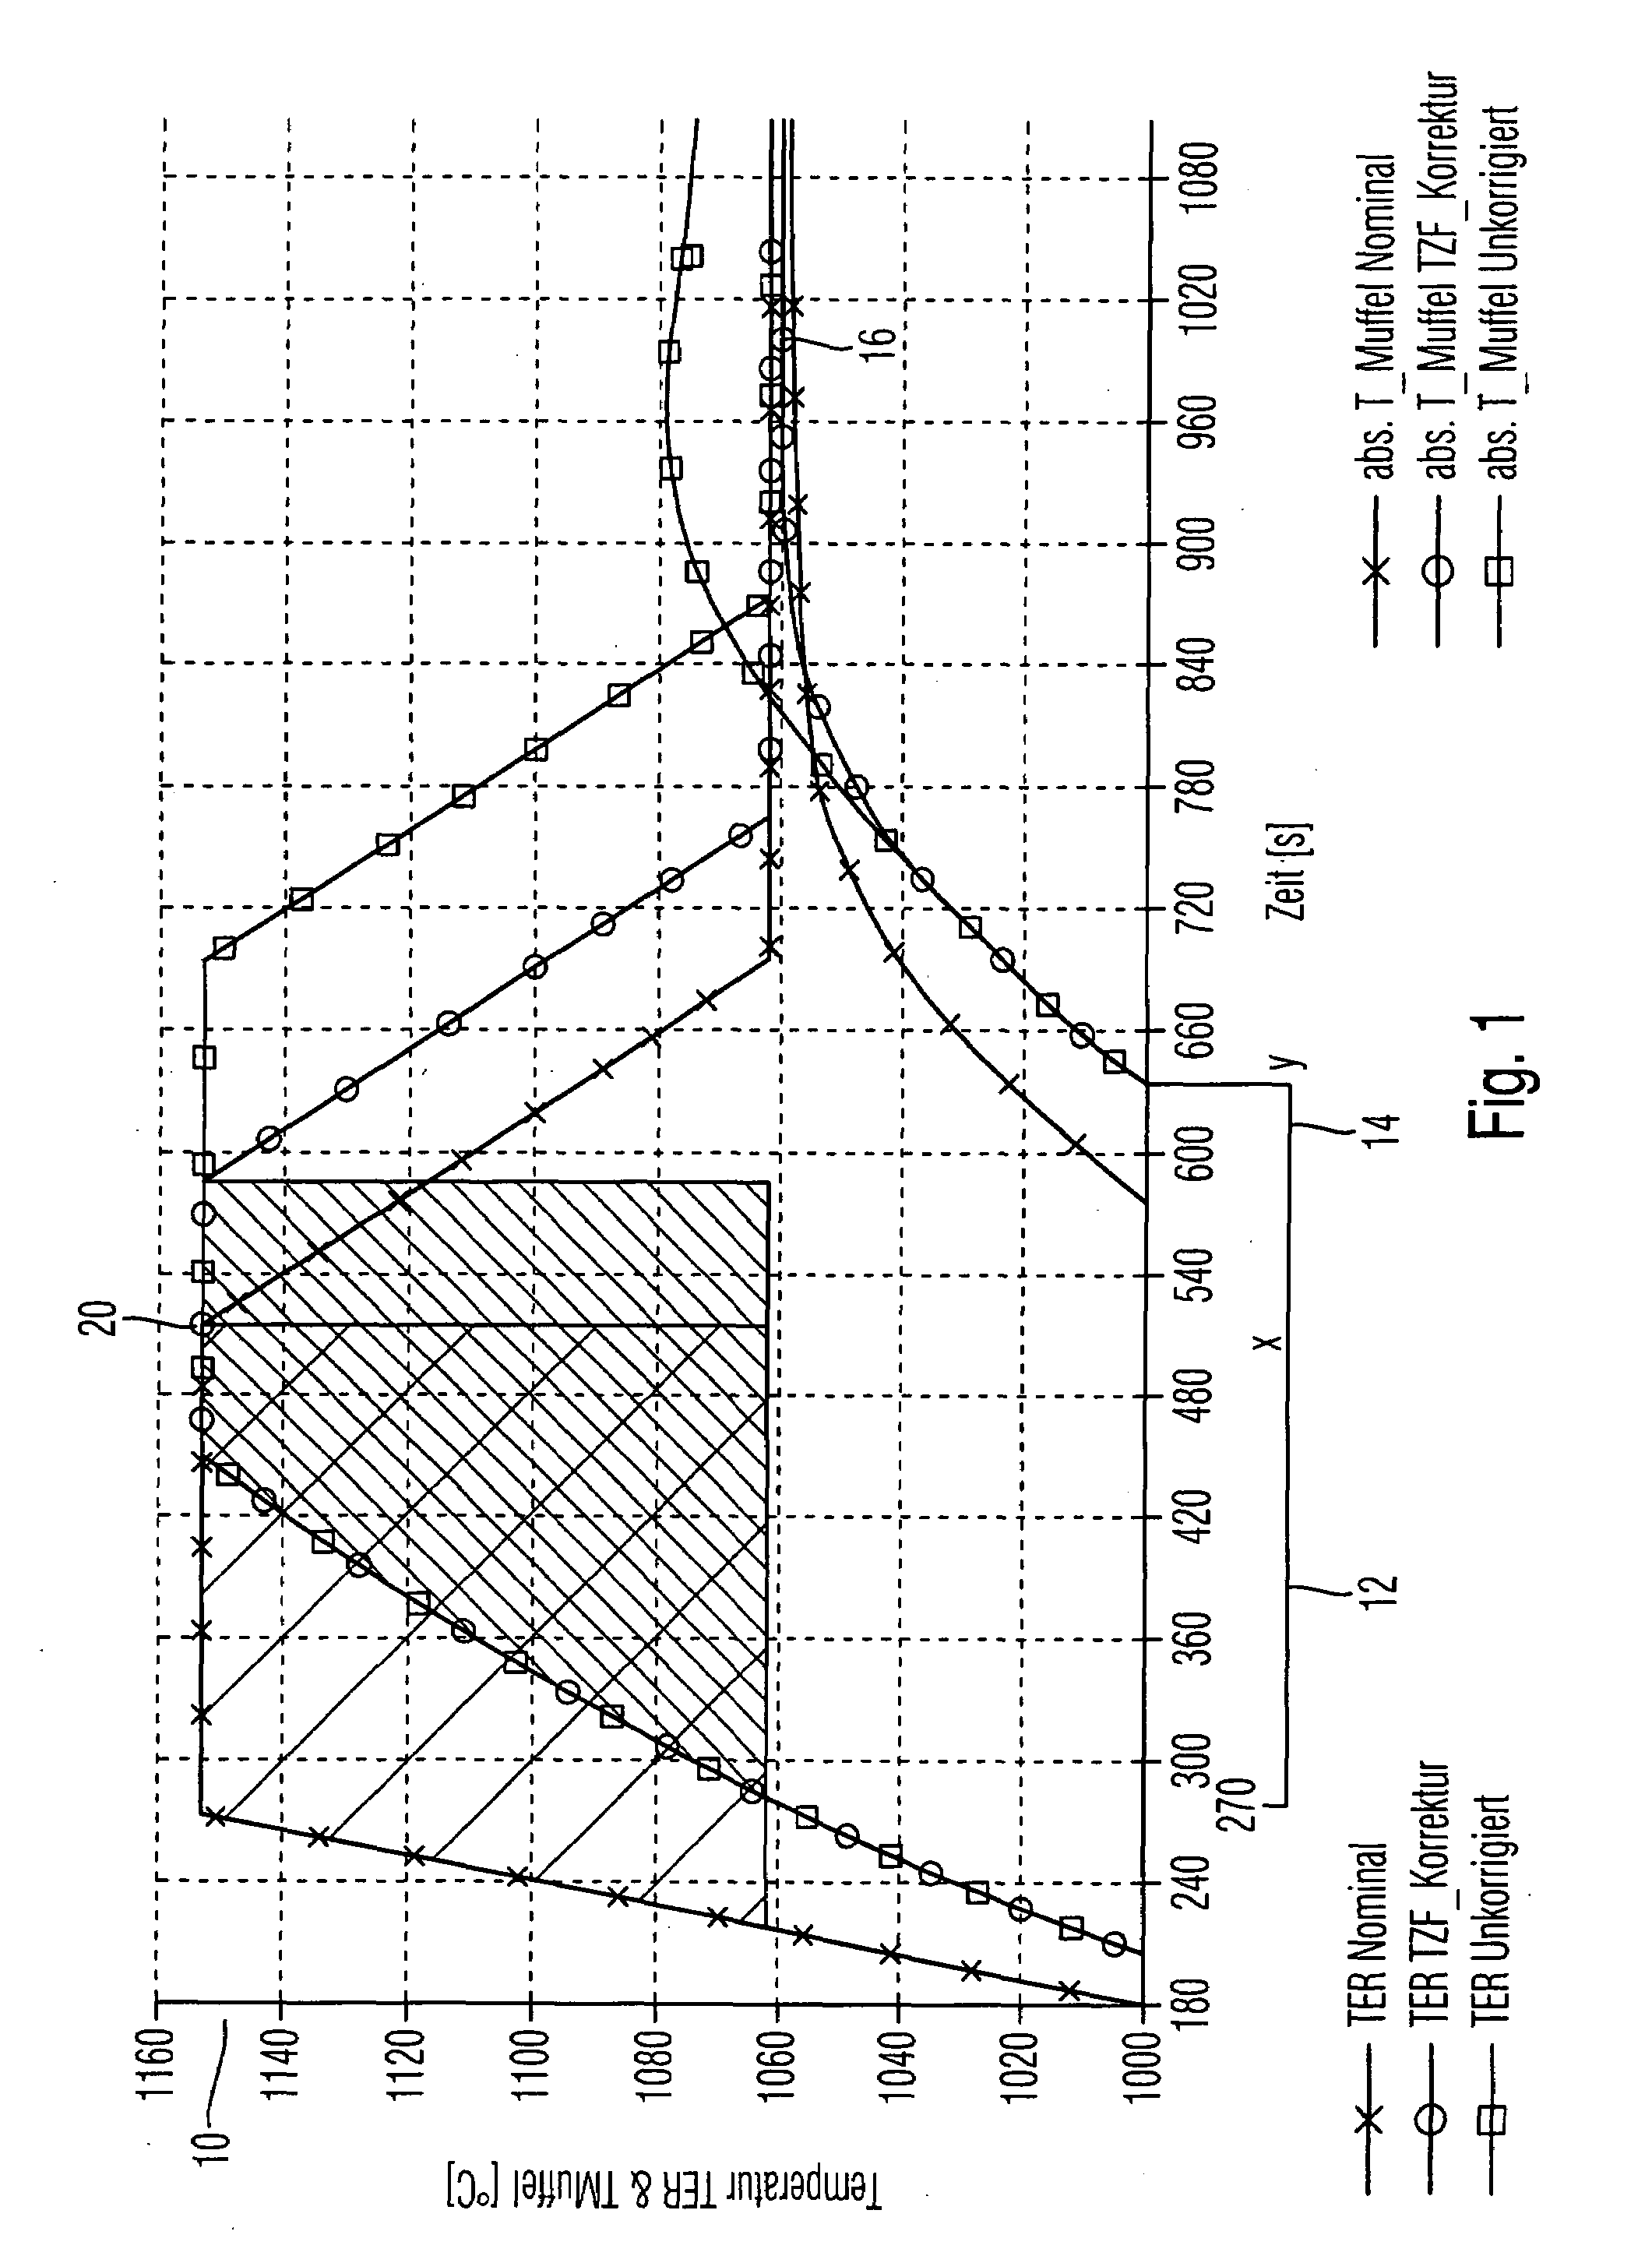 Method for operating a firing furnace, in particular for the dental sector, and firing furnace